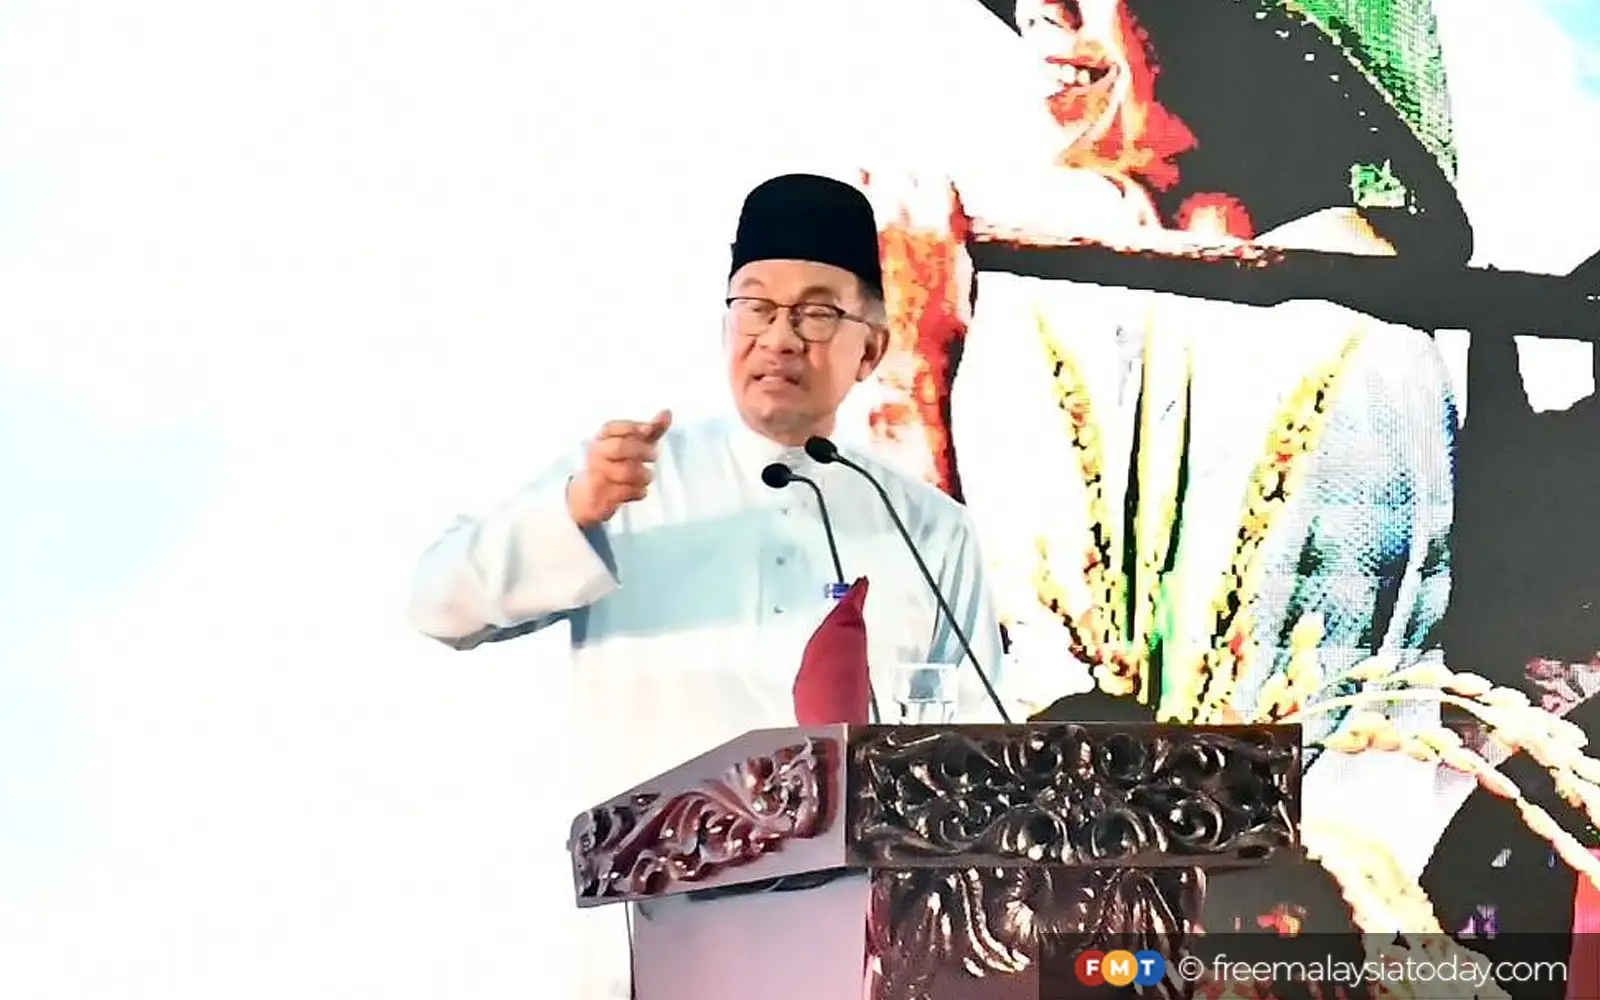 no pay rise for ‘slow and lazy’ civil servants, says anwar